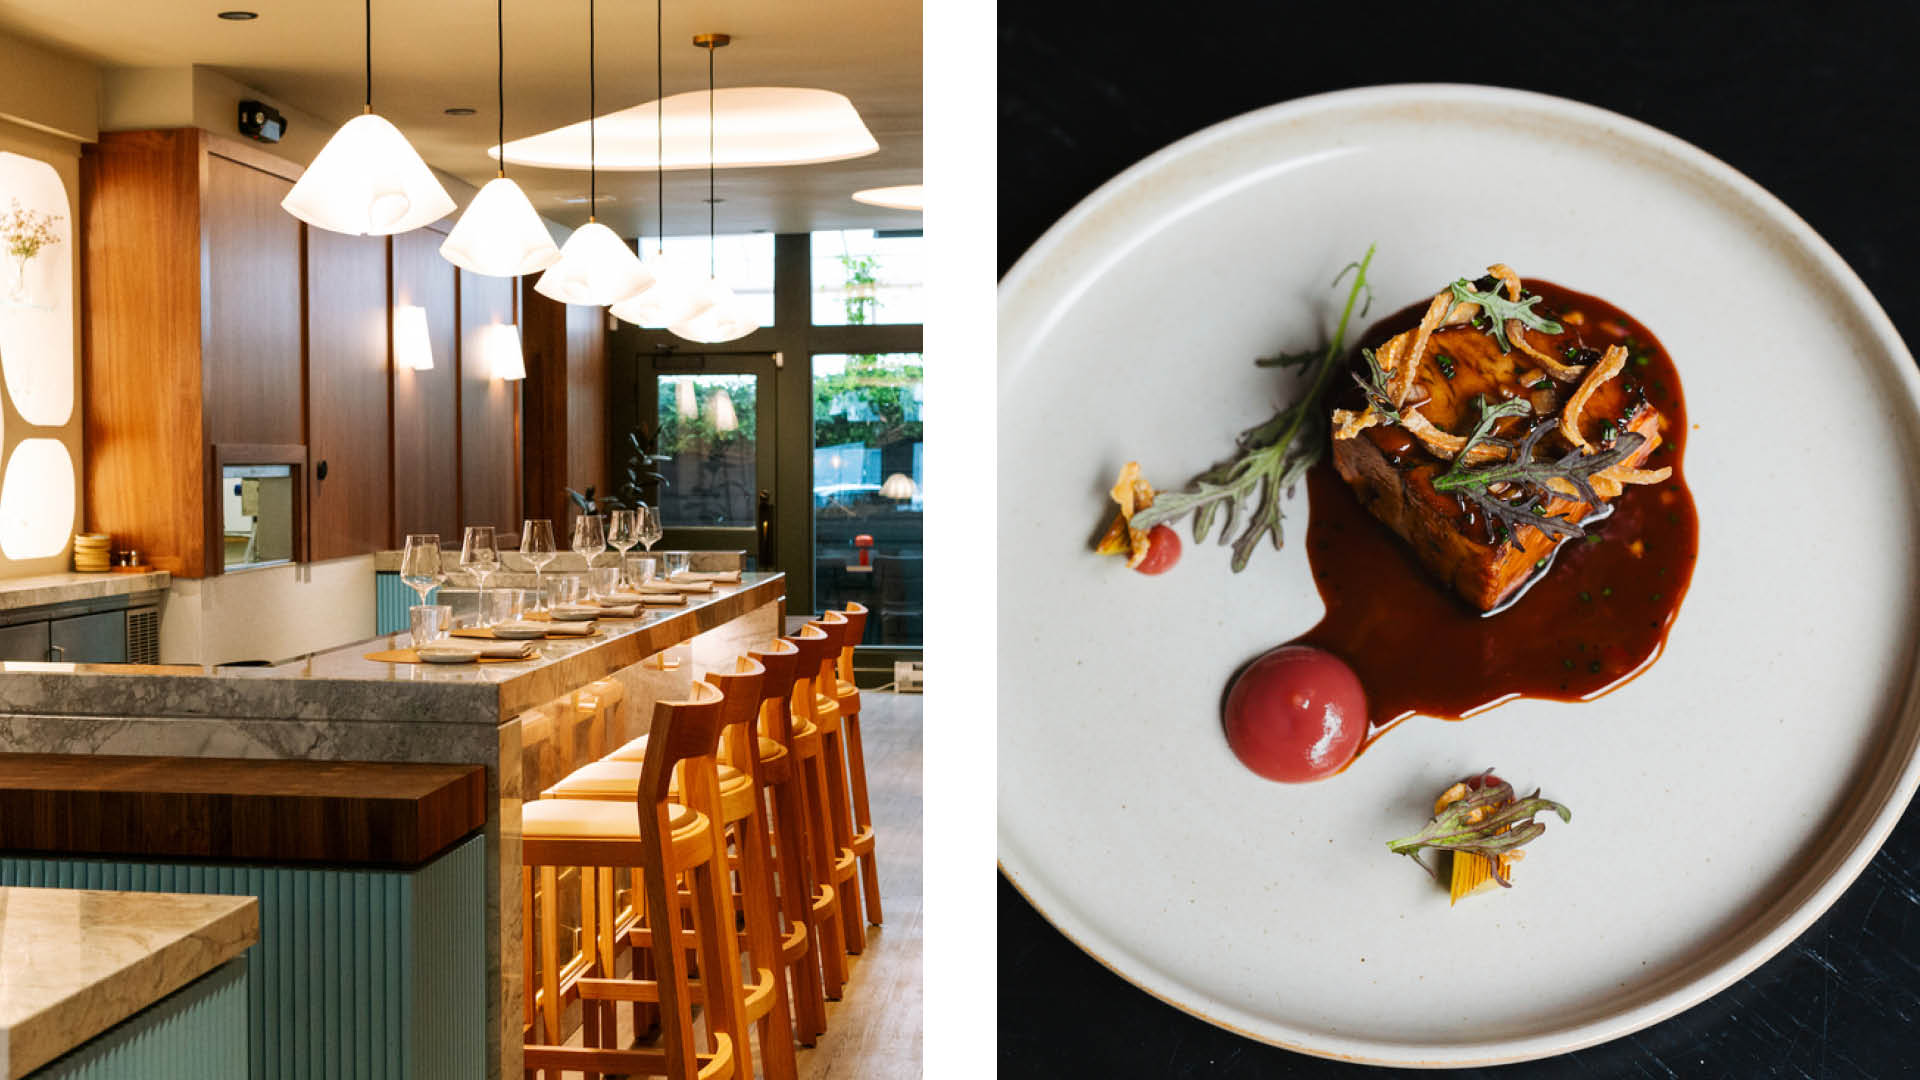 A split image shows a high-end restaurant's bar and a savory plated dish